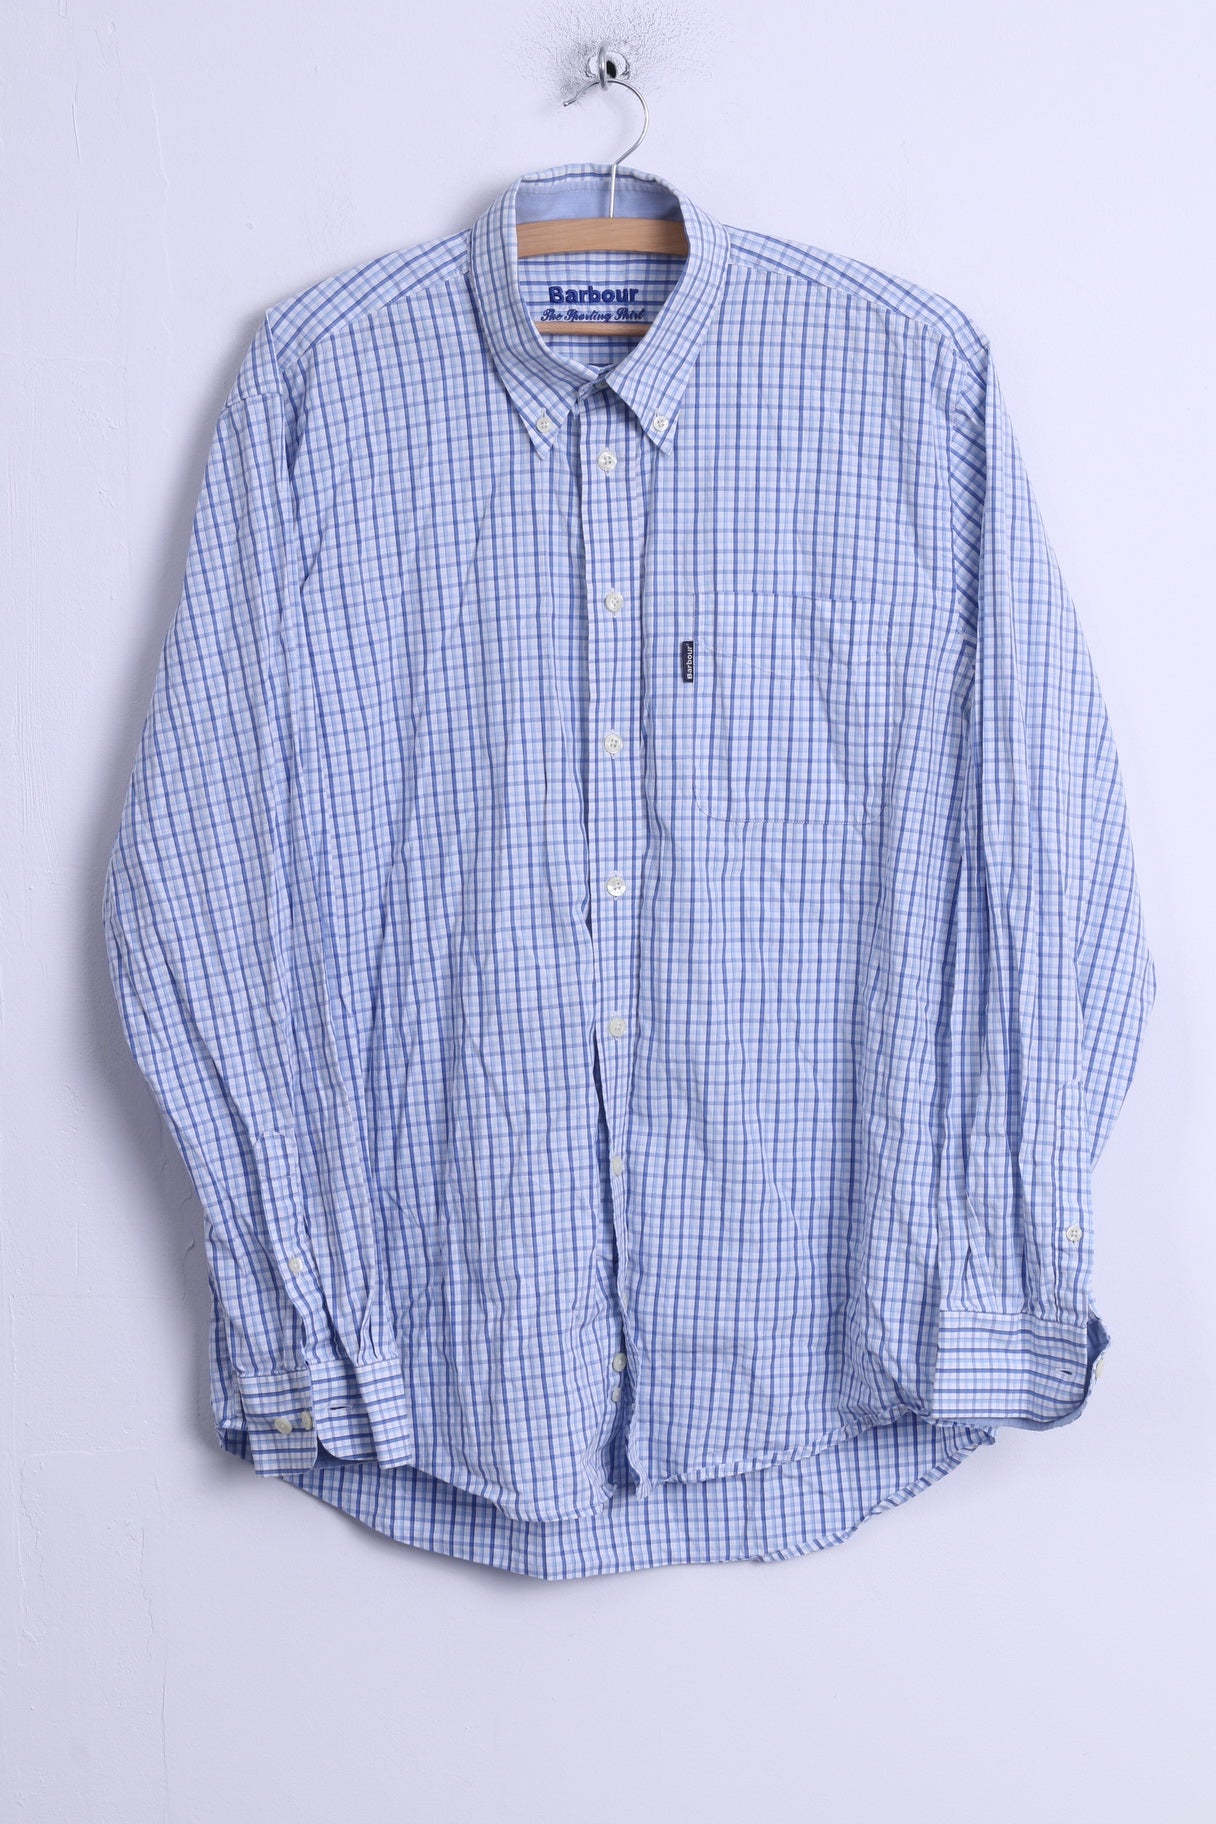 Barbour Mens L Casual Shirt Blue Cotton Long Sleeve Checkered Button Down Collar